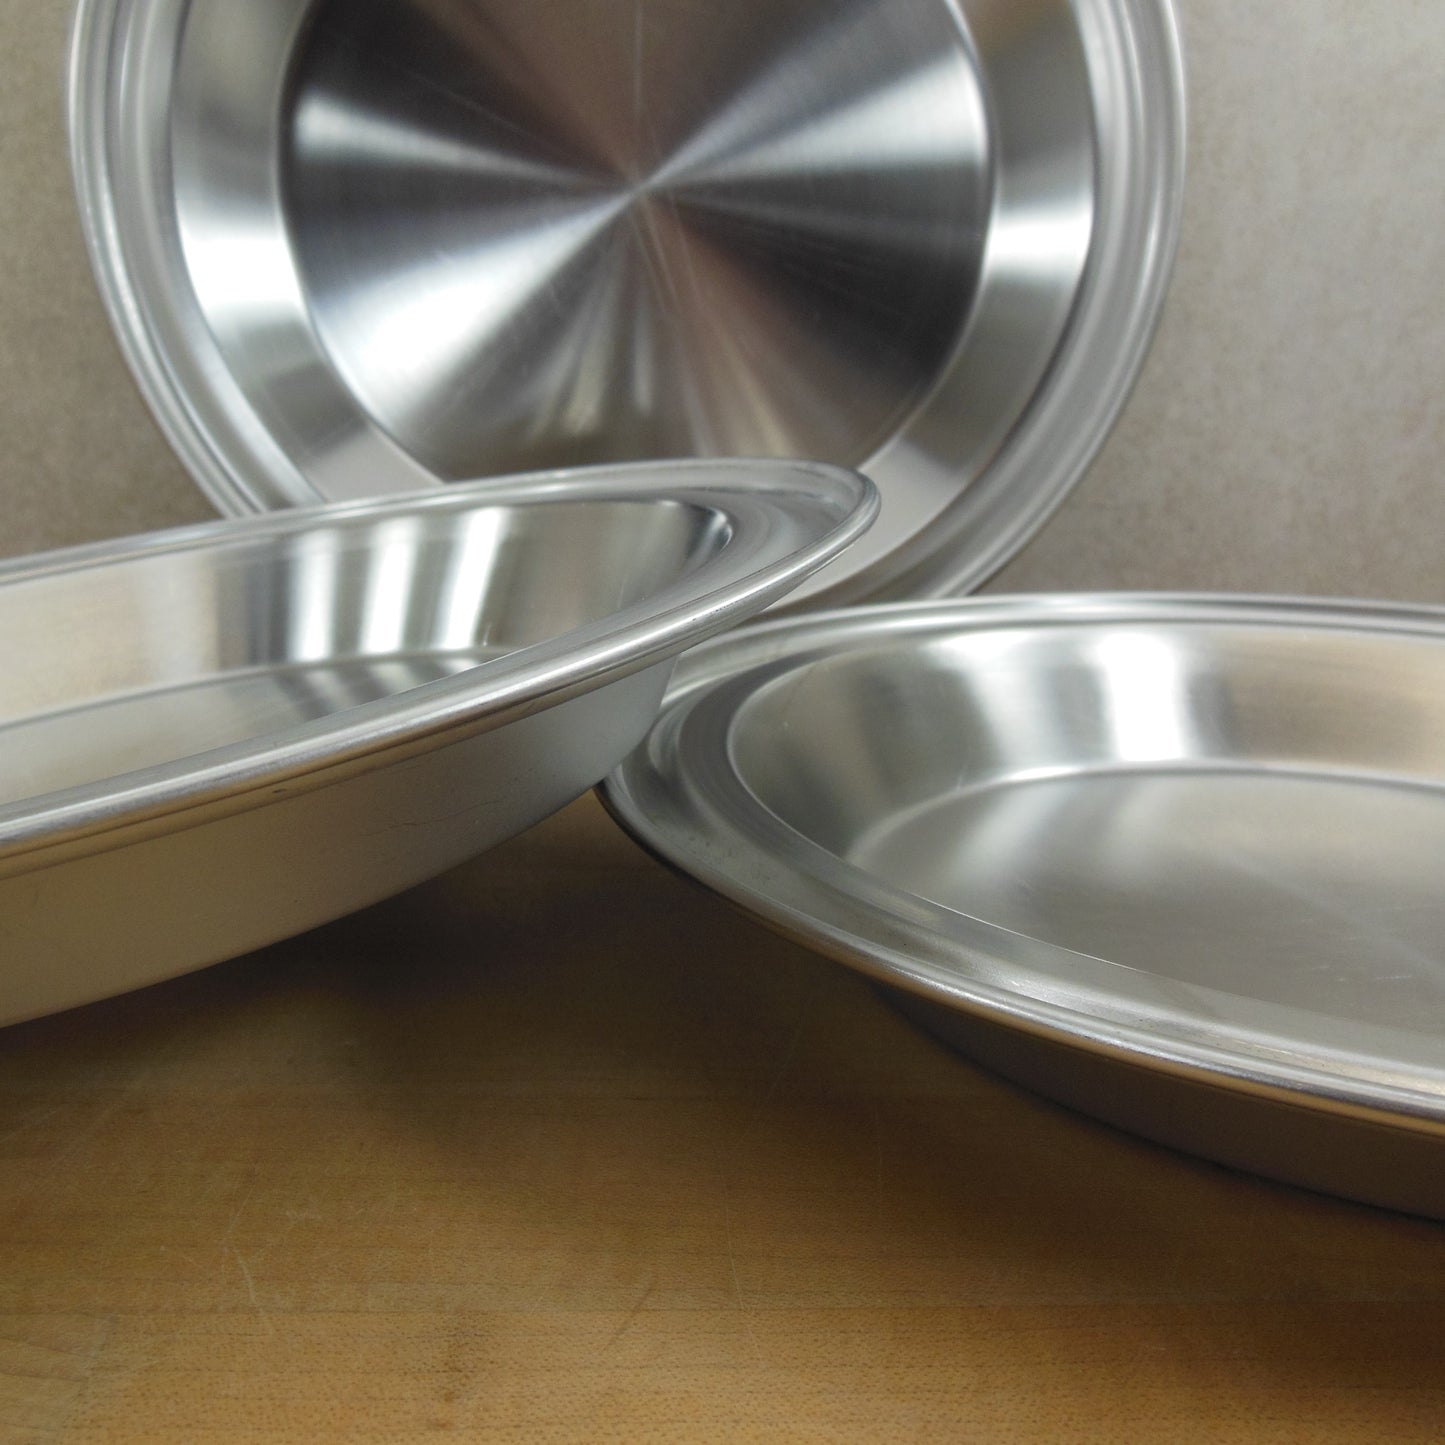 Unbranded Trio No Drip Edge Stainless Steel Pie Pan Plates 9" x 1-1/2" or 11" Vintage